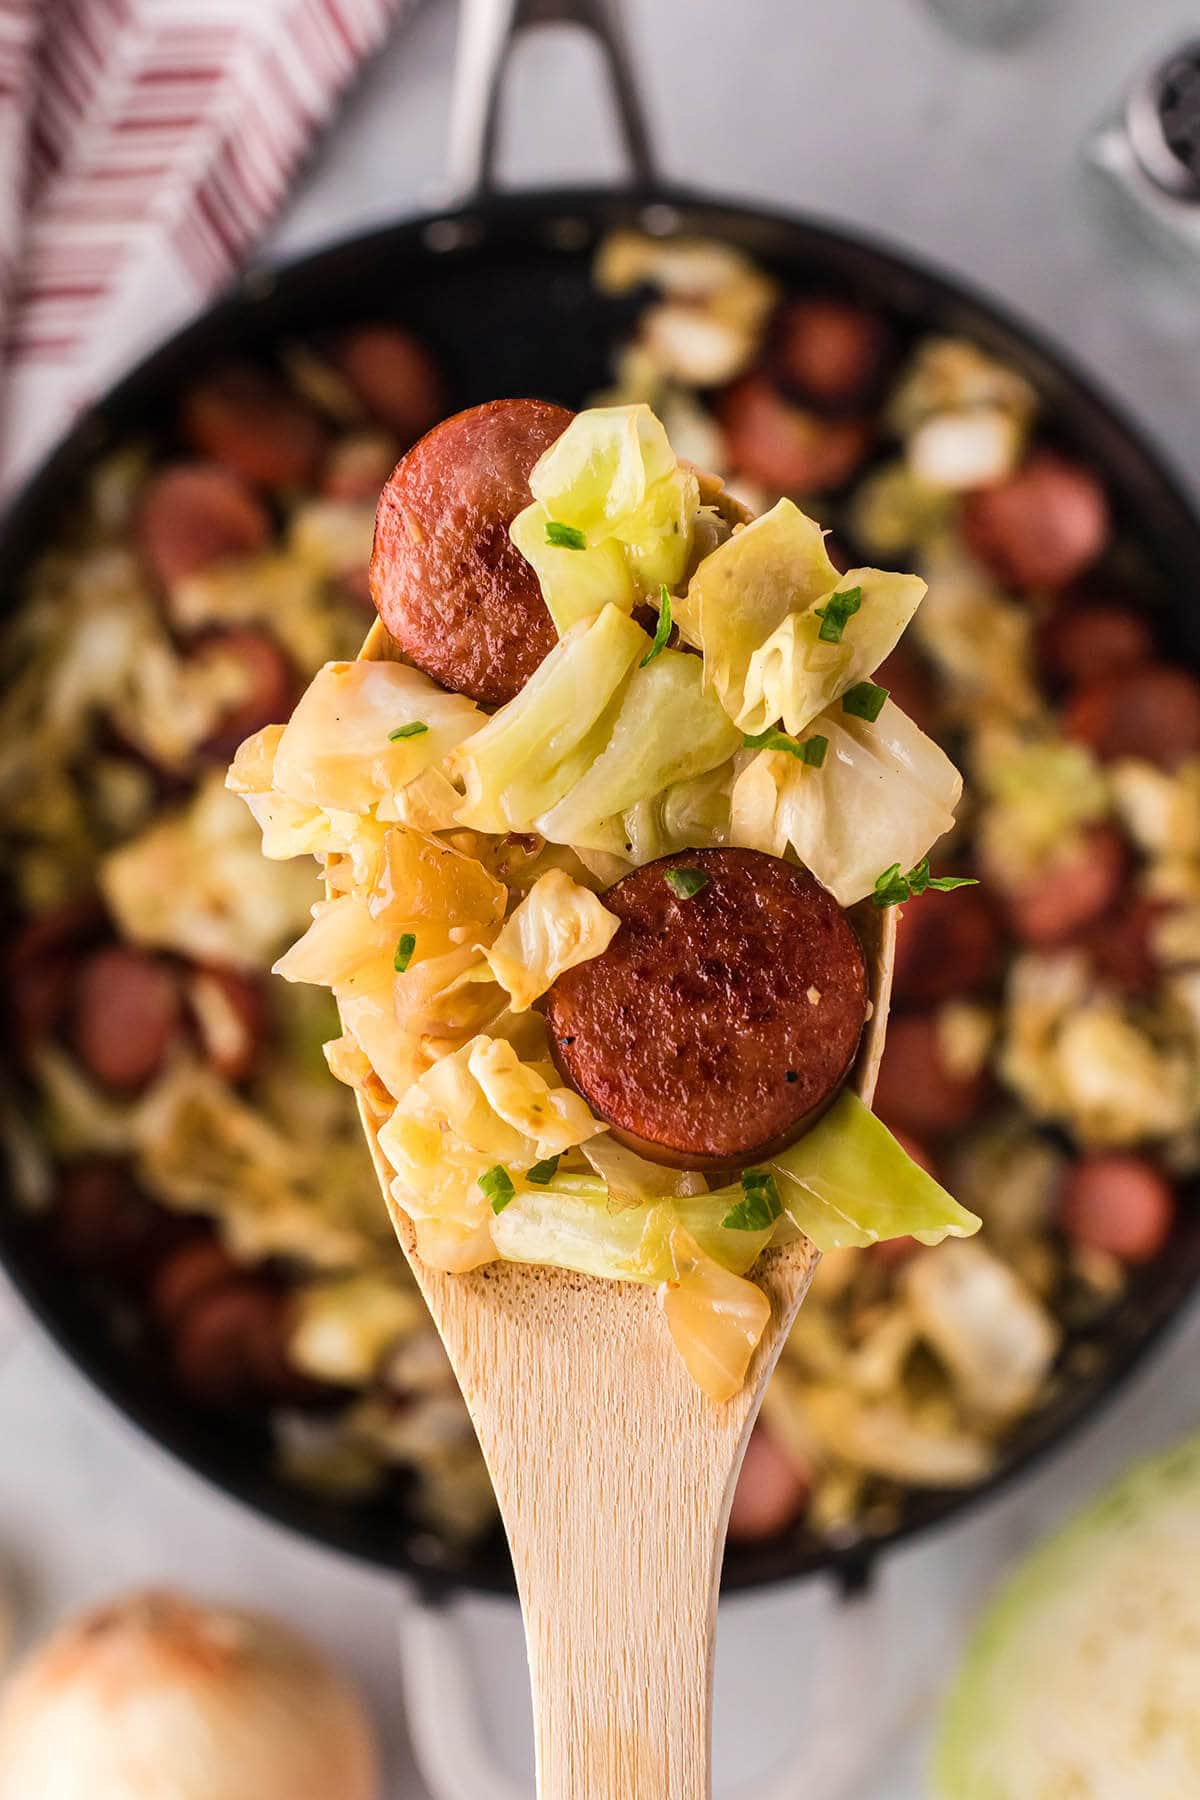 Kielbasa and cabbage in a cast iron with a serving spoon.